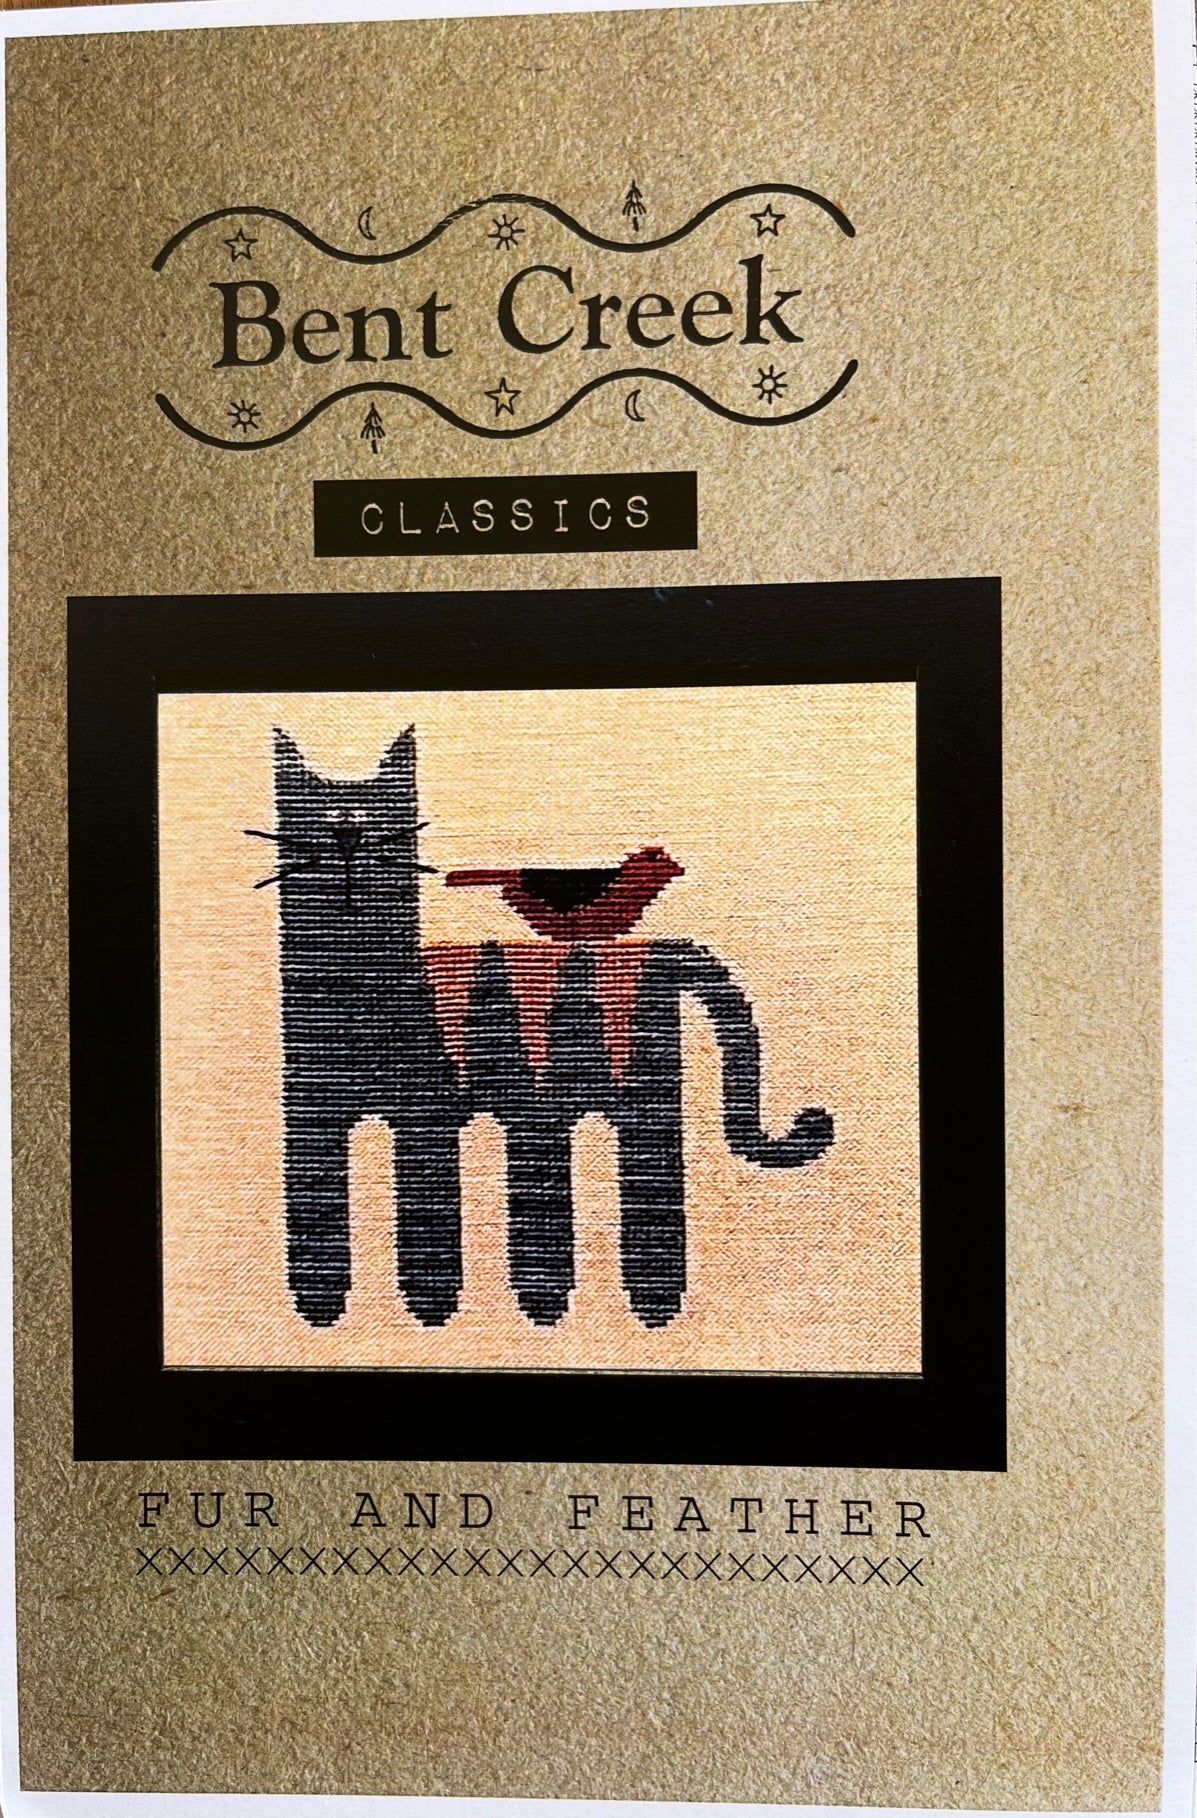 Fur and Feather Cross Stitch Pattern Bent Creek